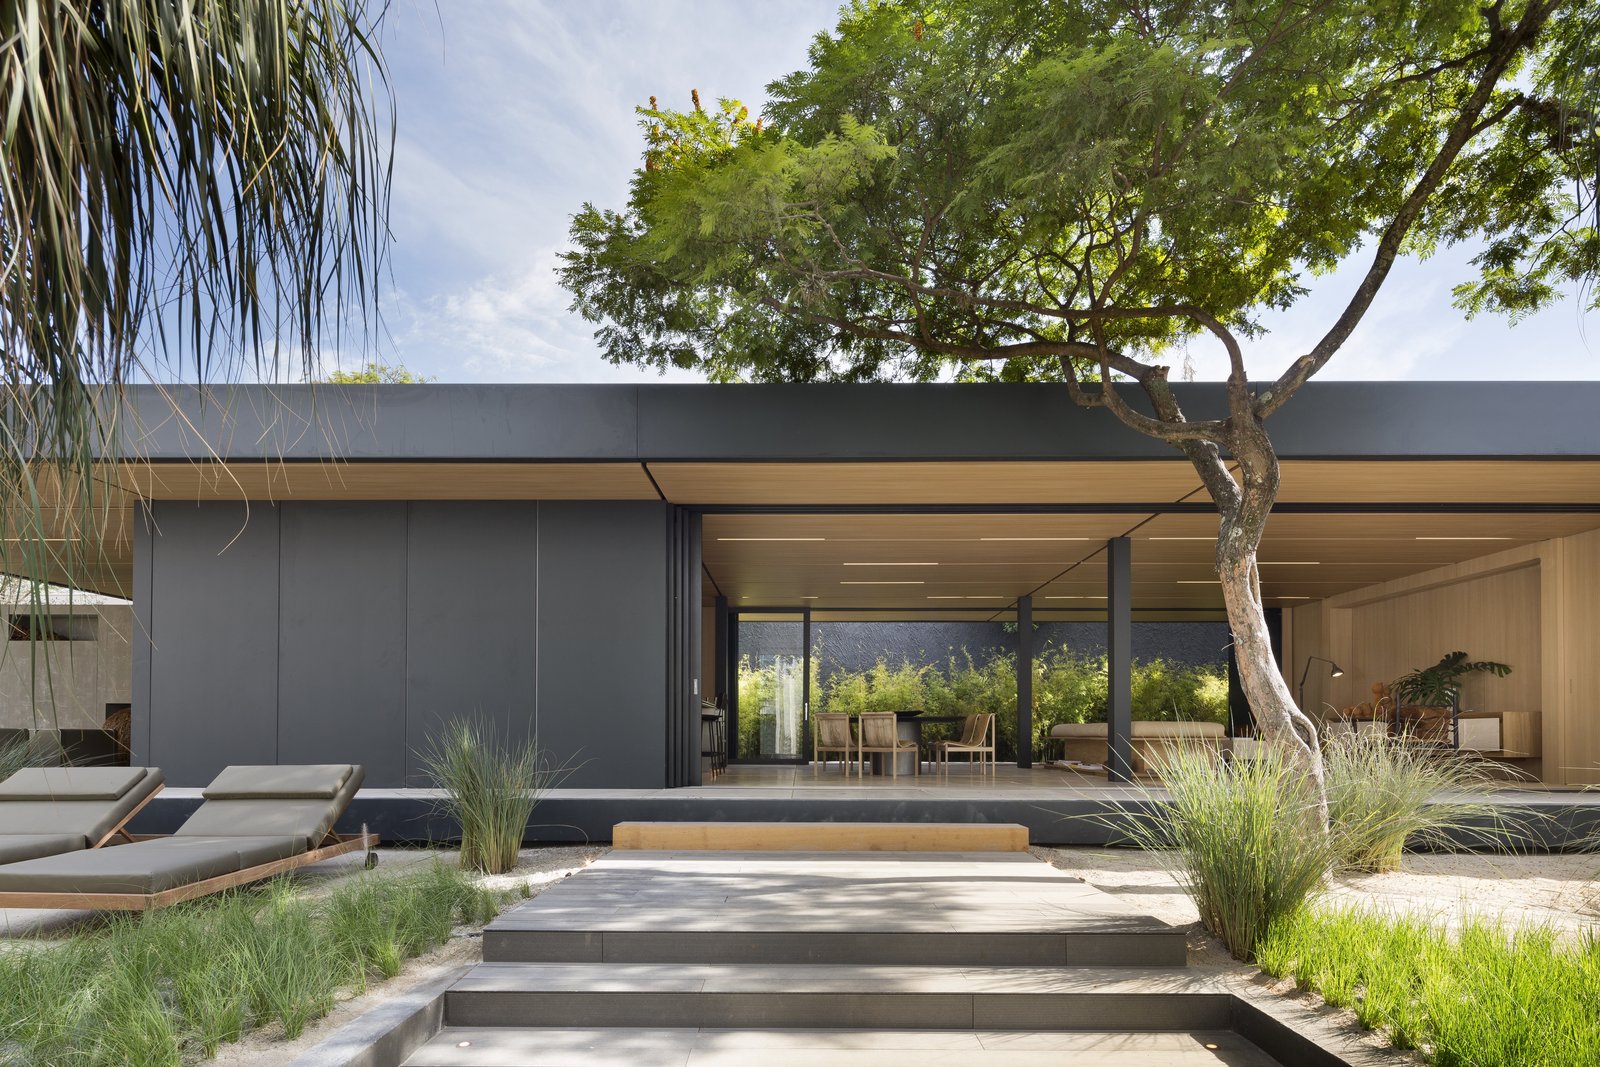 This Eco-Minded Home in São Paulo Raises the Bar For Prefab